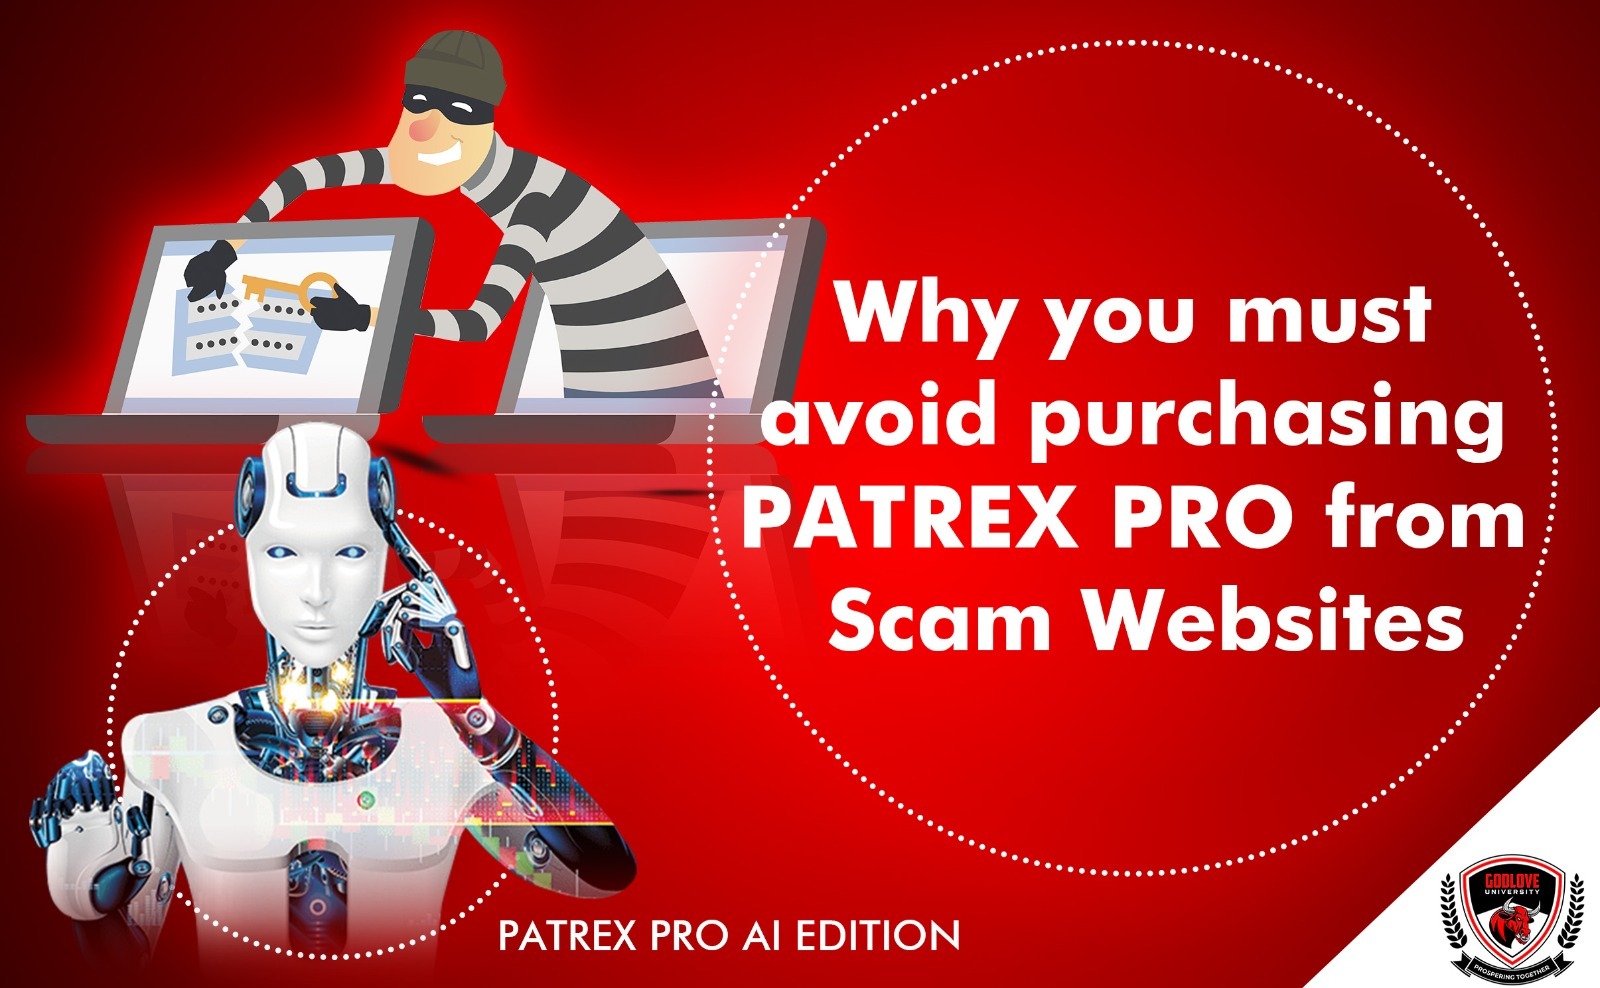 Patrex Pro from scam sites